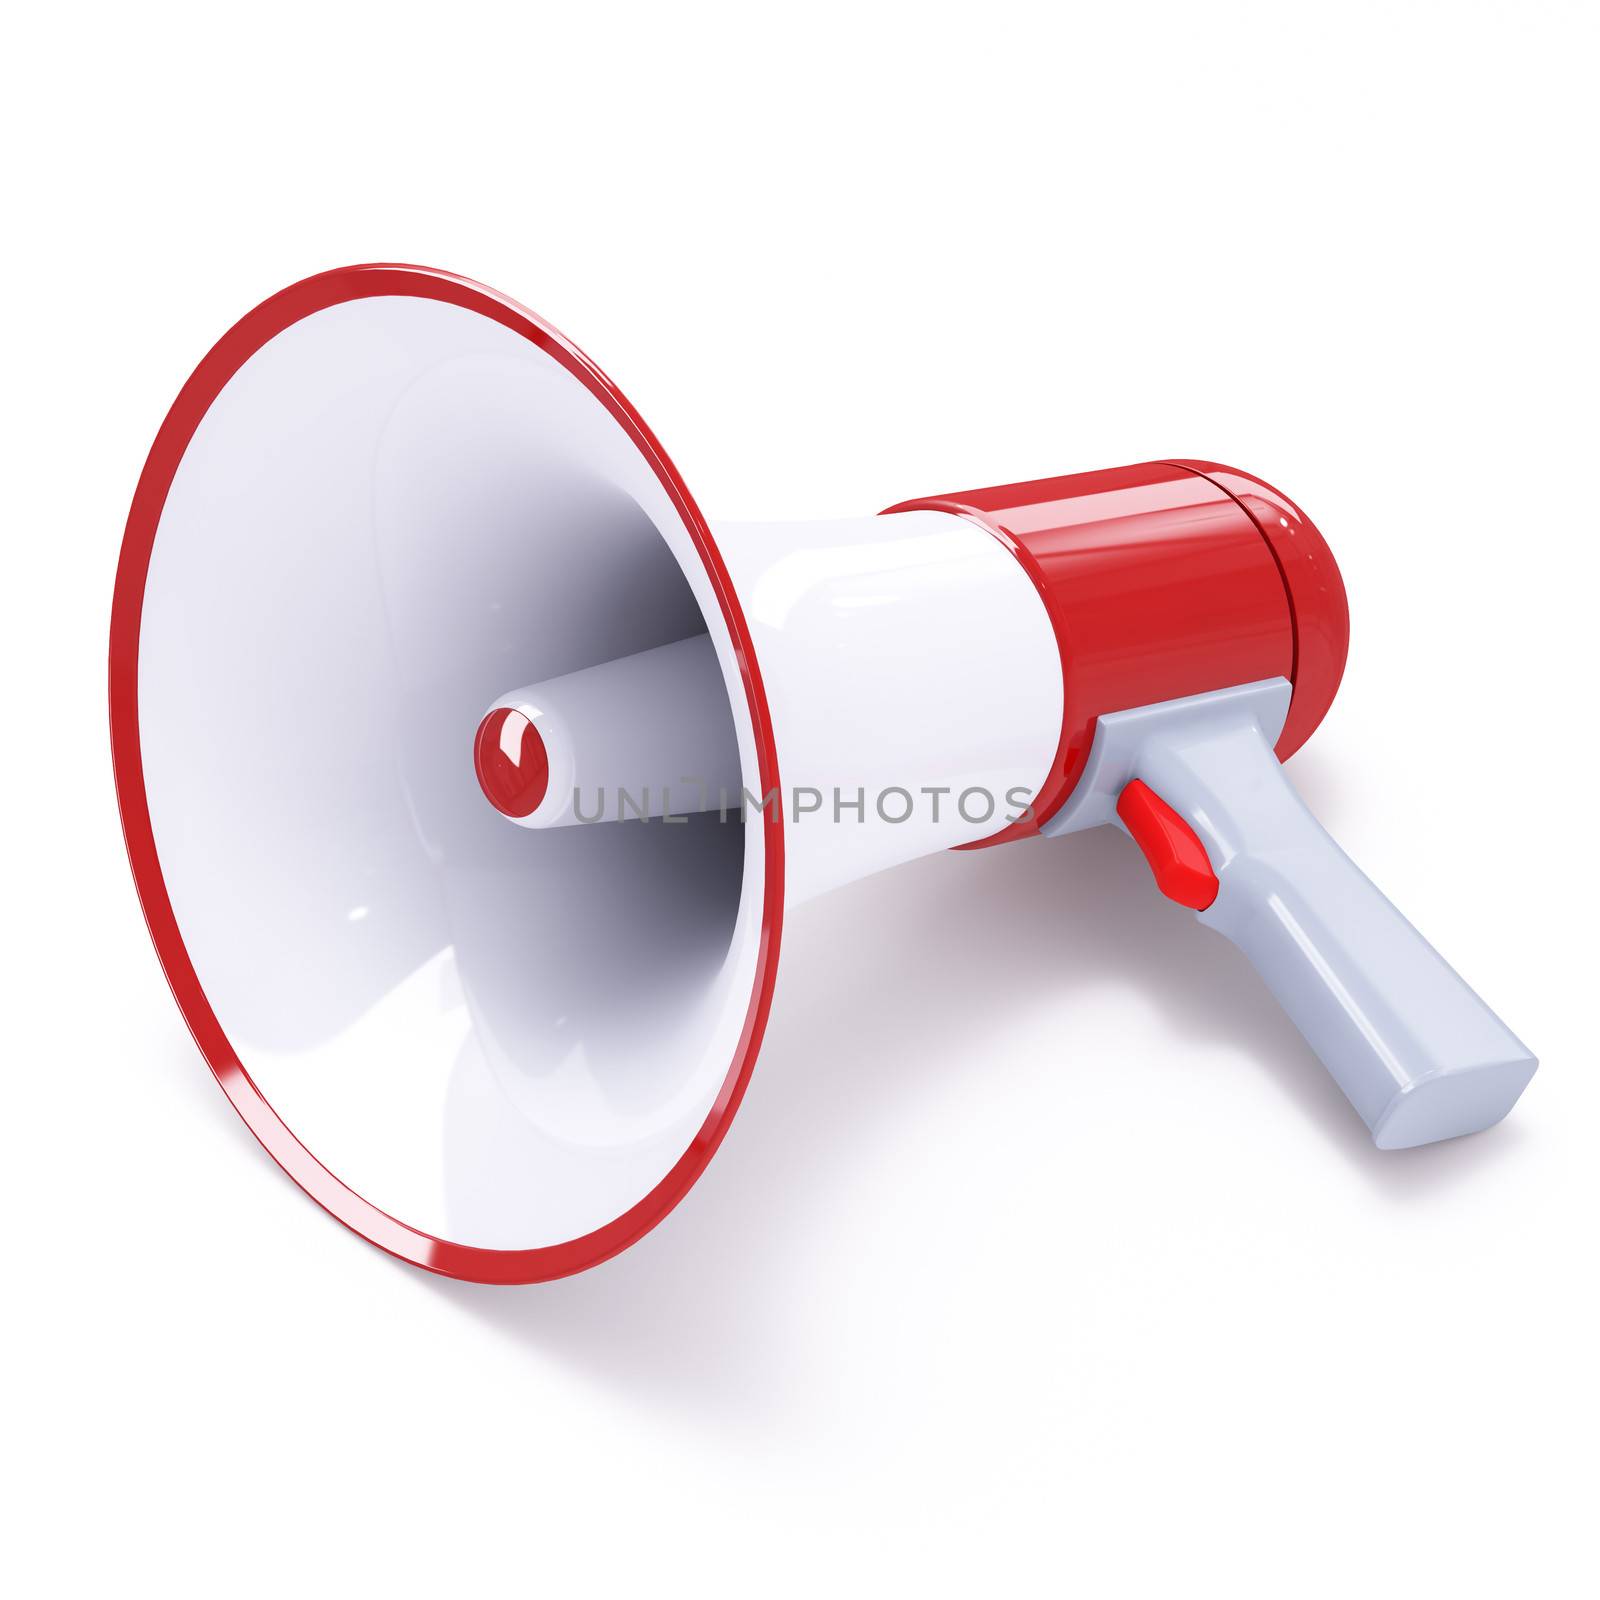 Red megaphone with red button isolated on white background.